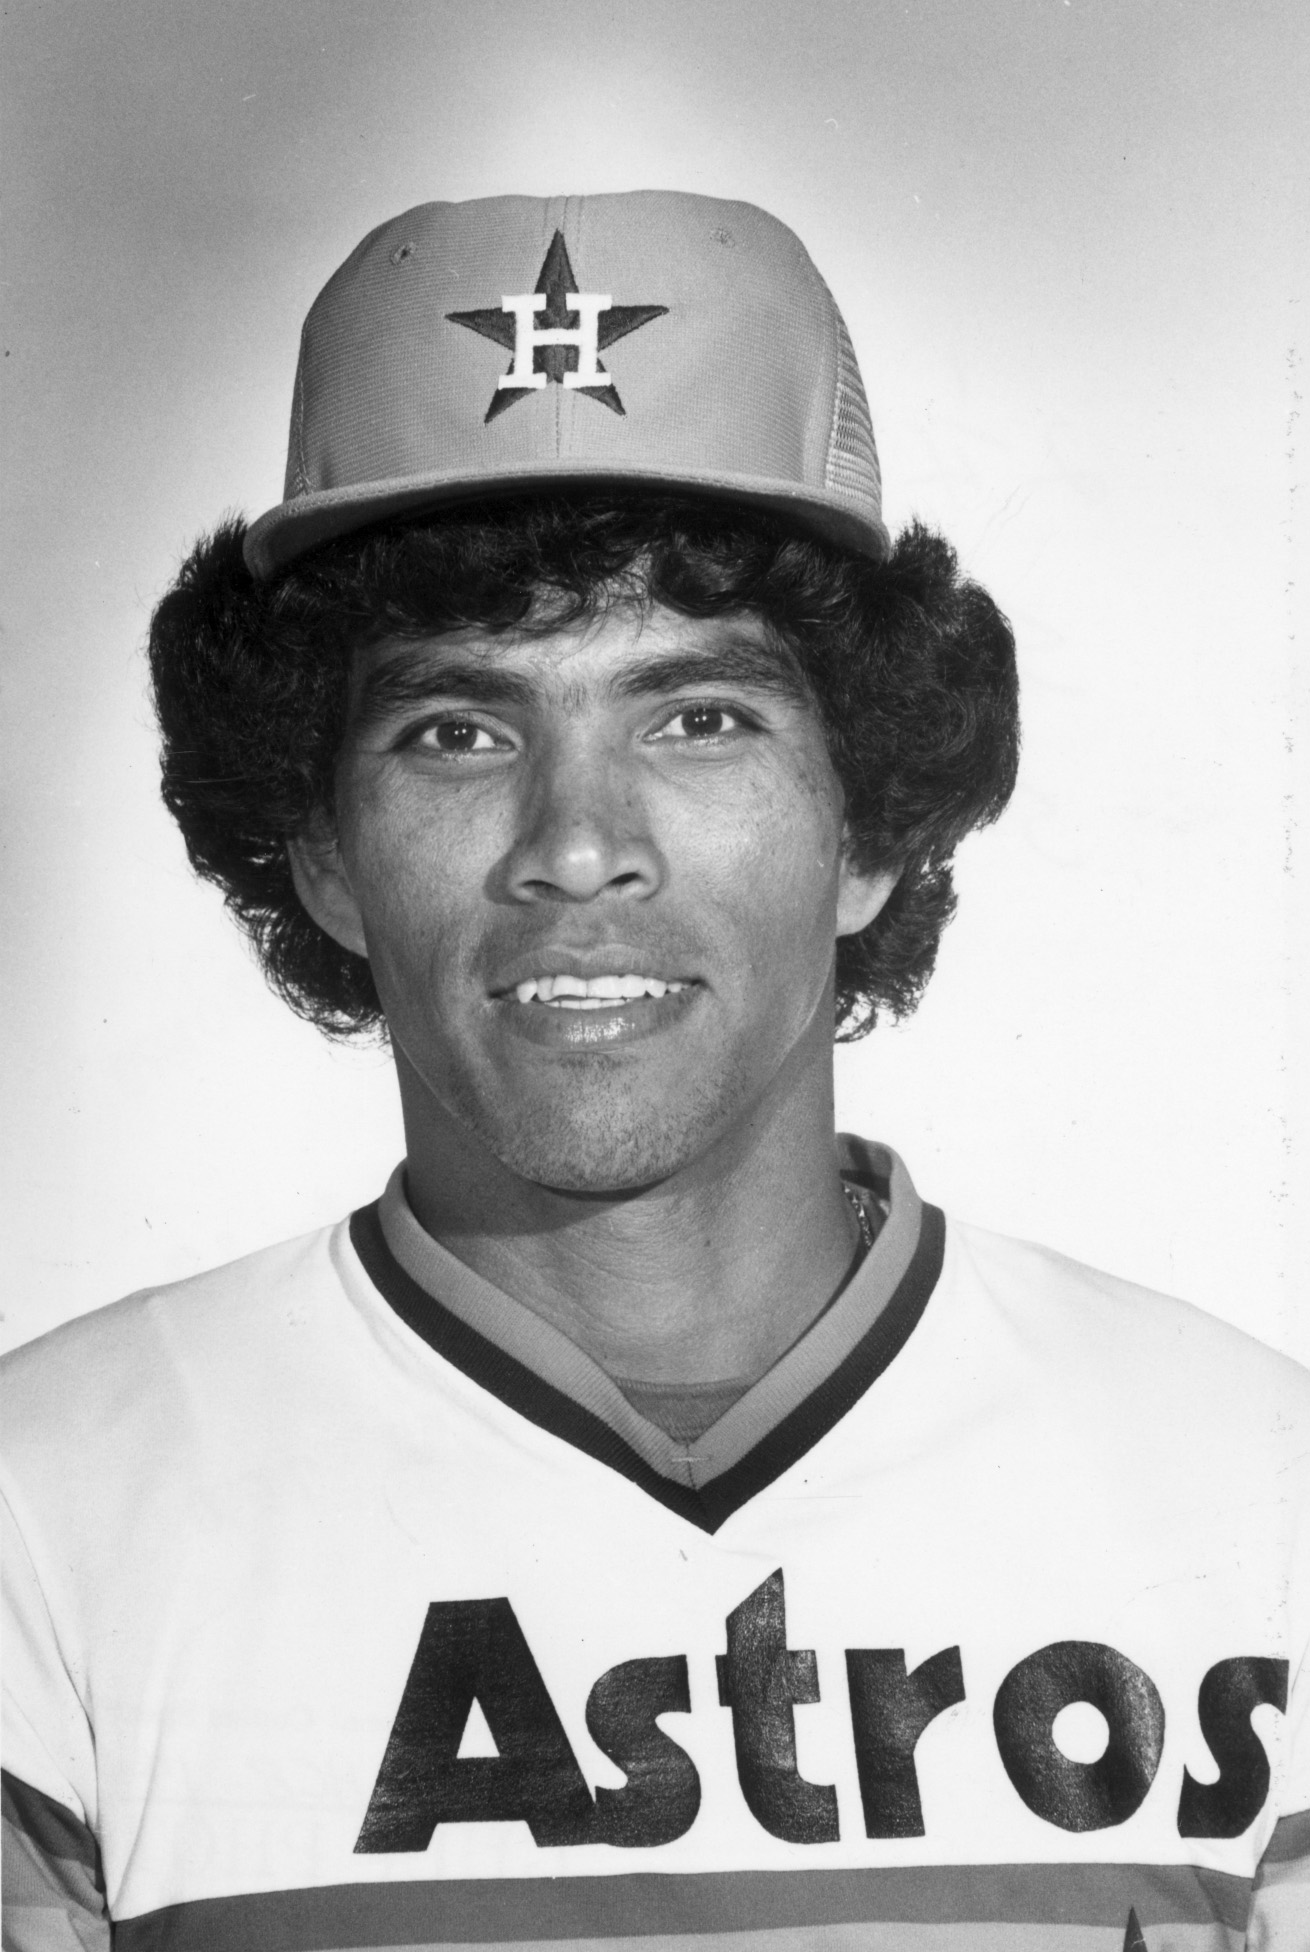 Astros legend Jose Cruz turns 76 years old - Our Esquina